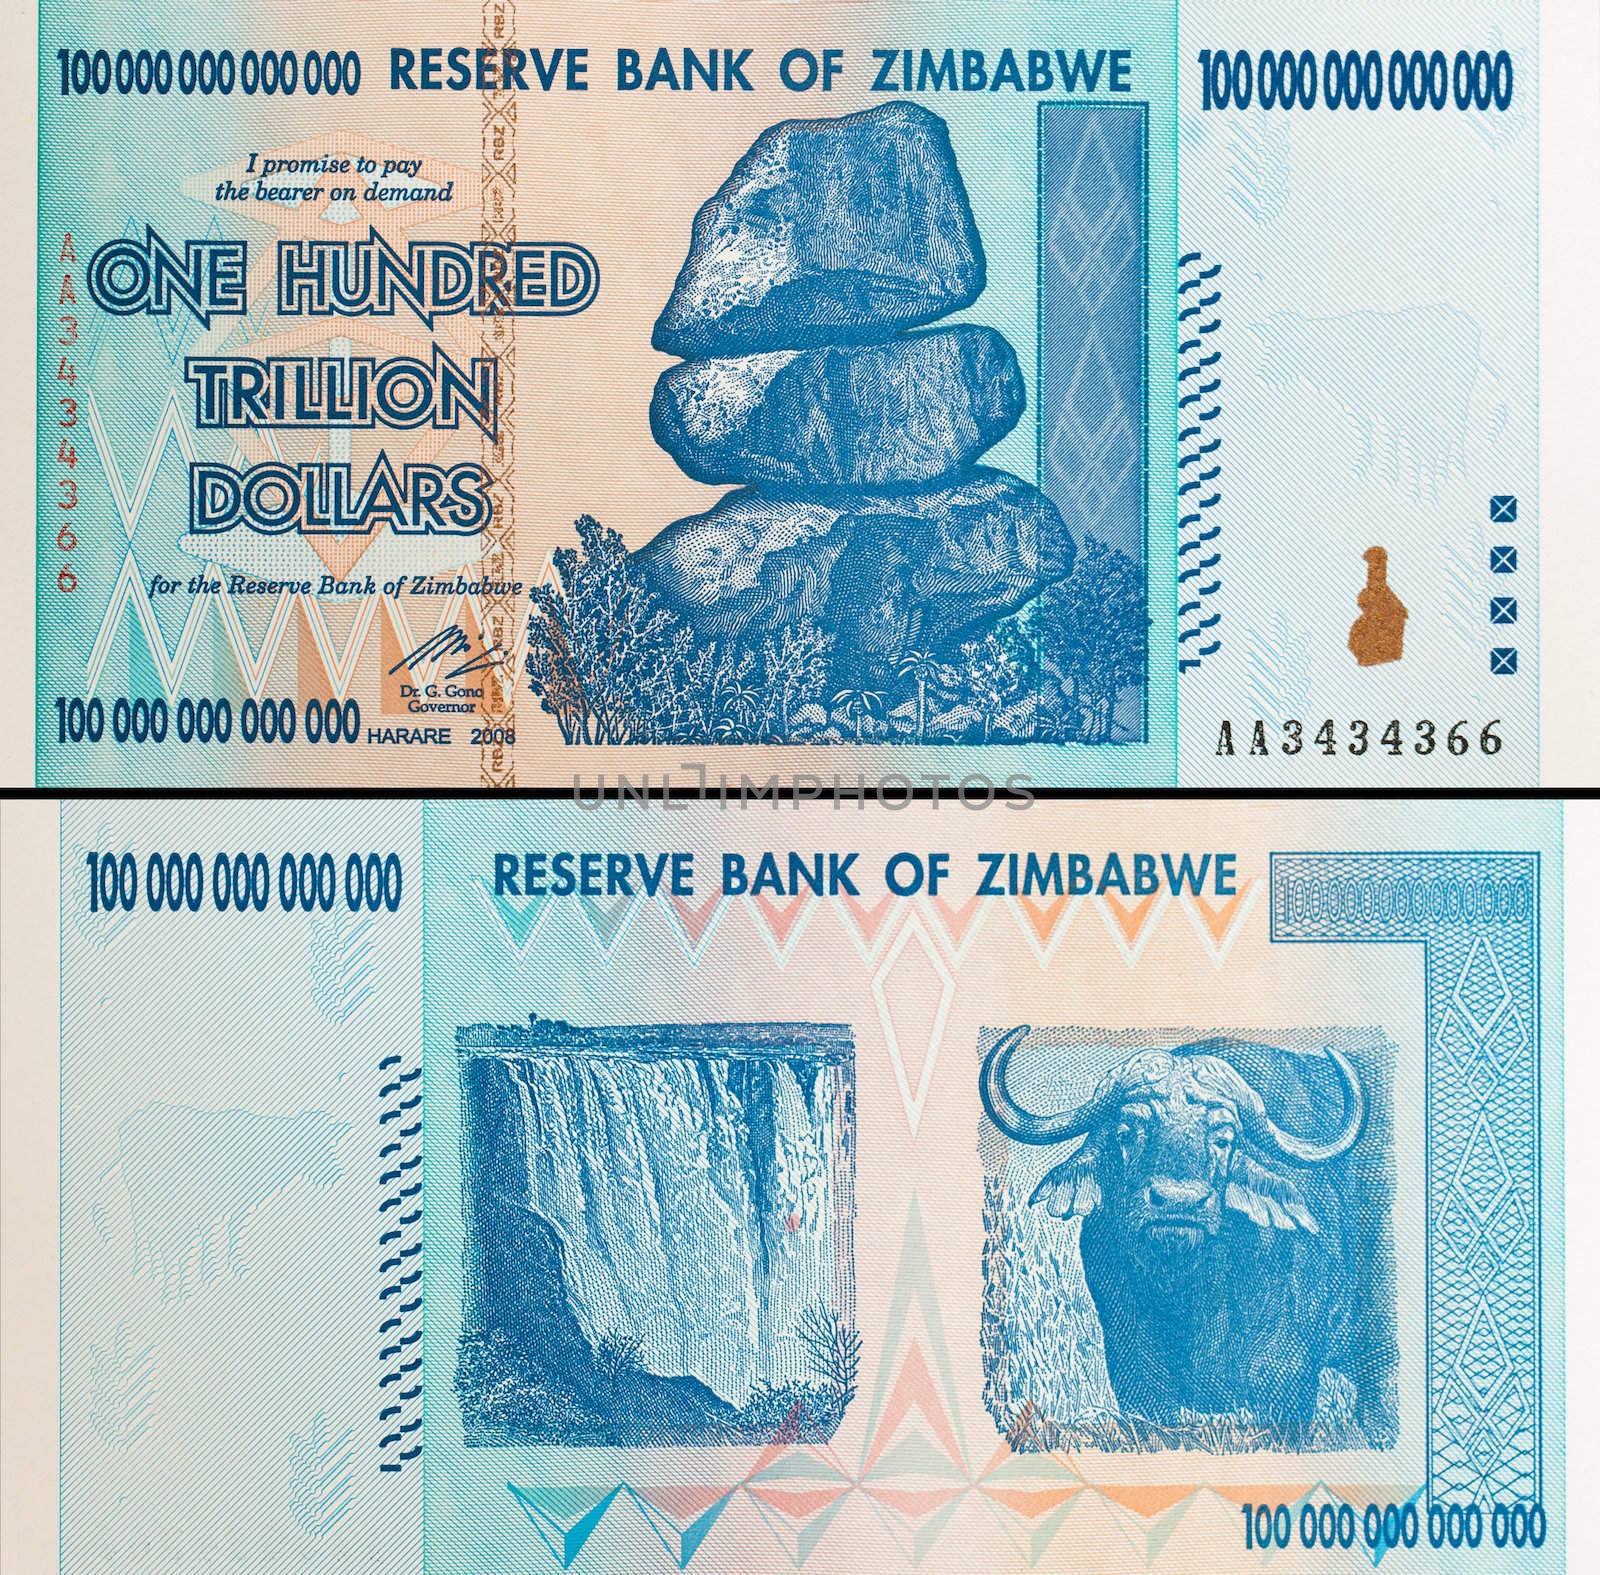 One hundred trillion nill or note by Jaykayl